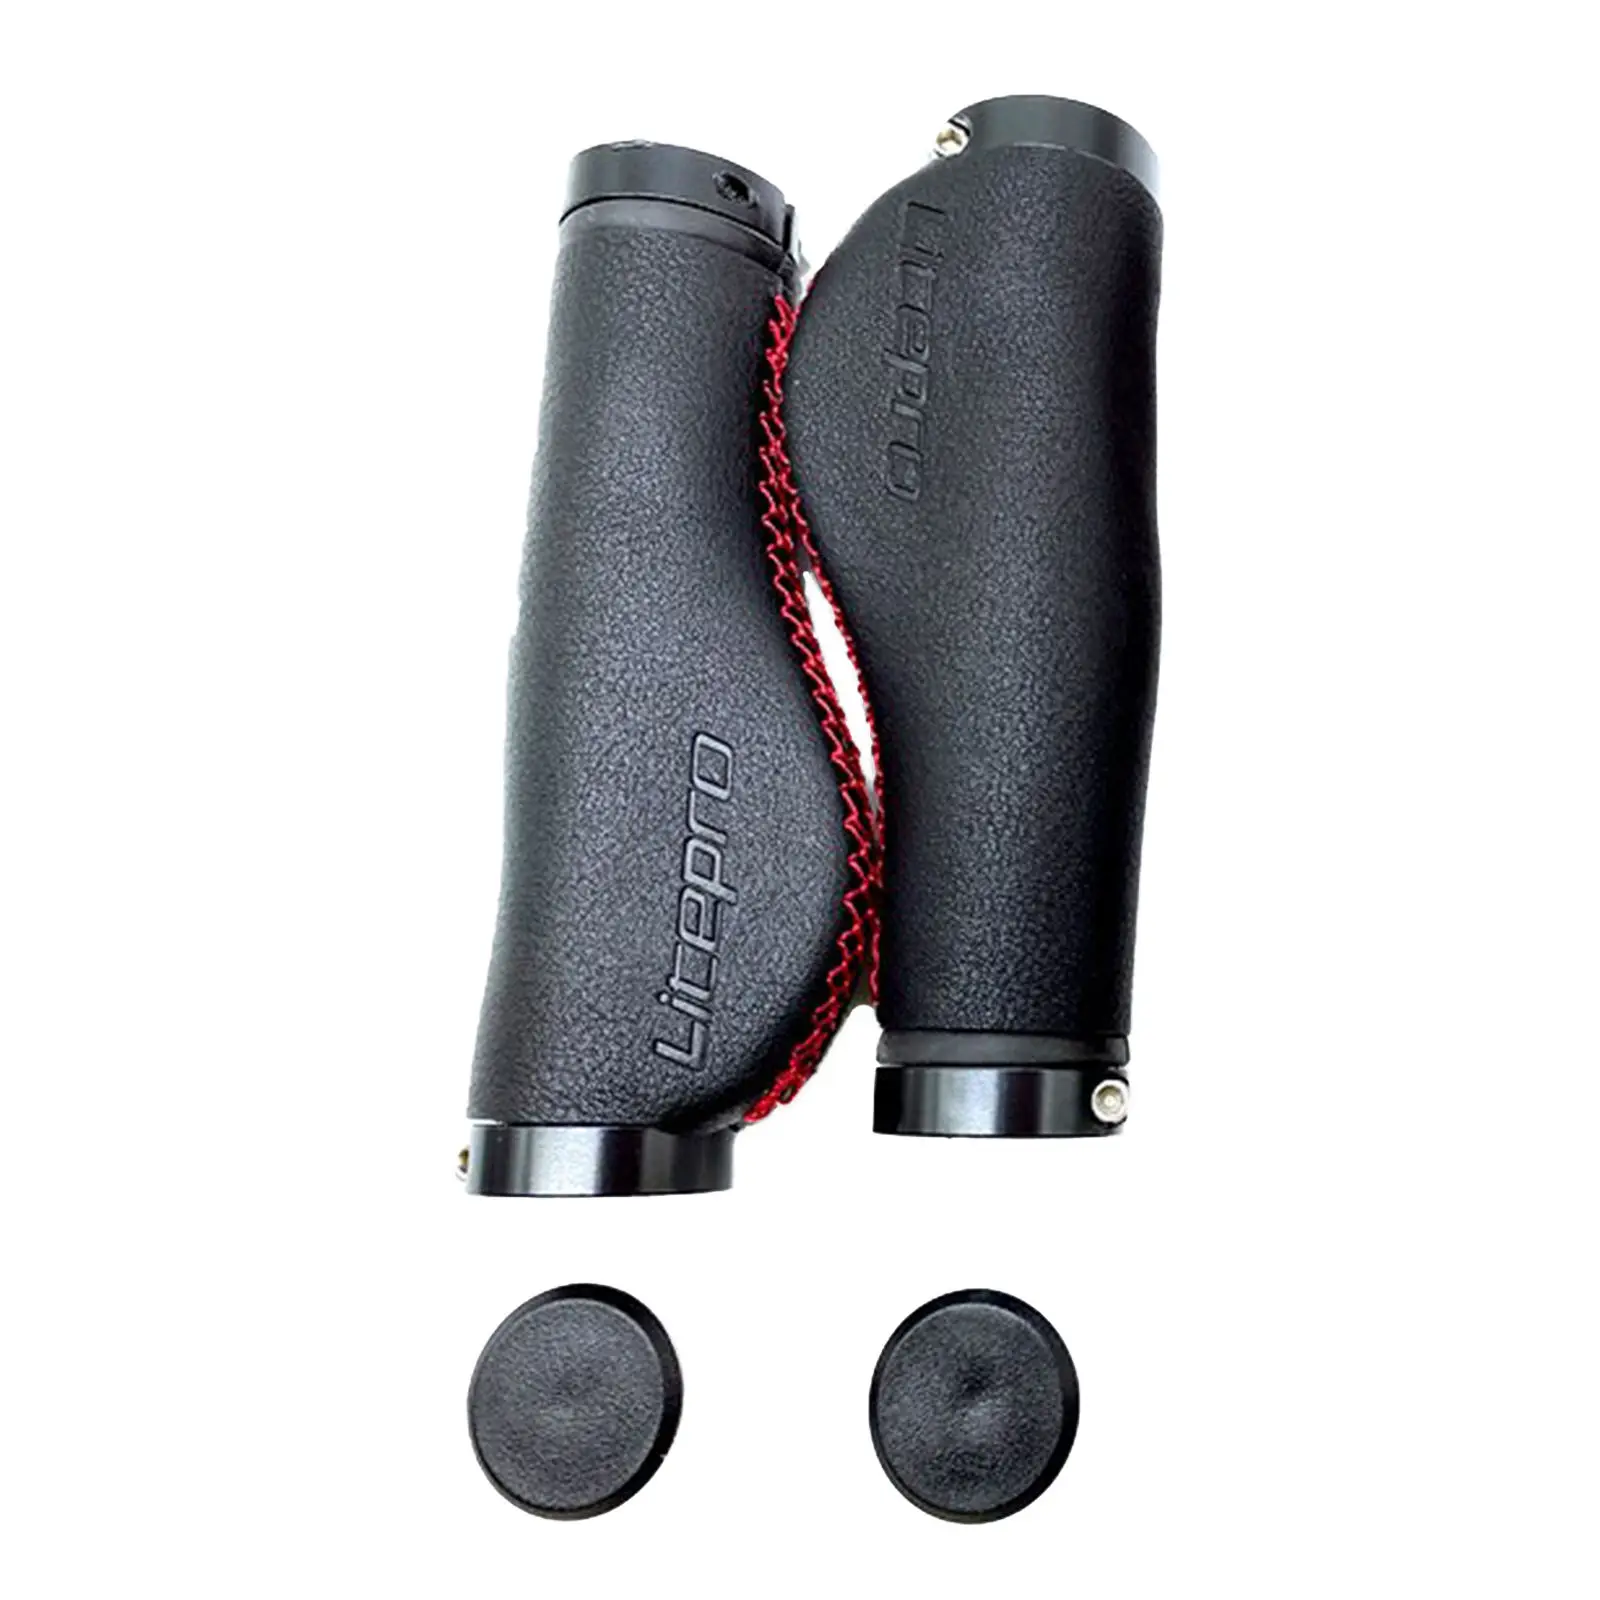 Bicycle Grips Non Slip Vintage Style Comfort Artificial Leather Handlebar Grips Scooter Road Bike Bike Part Cycling MTB